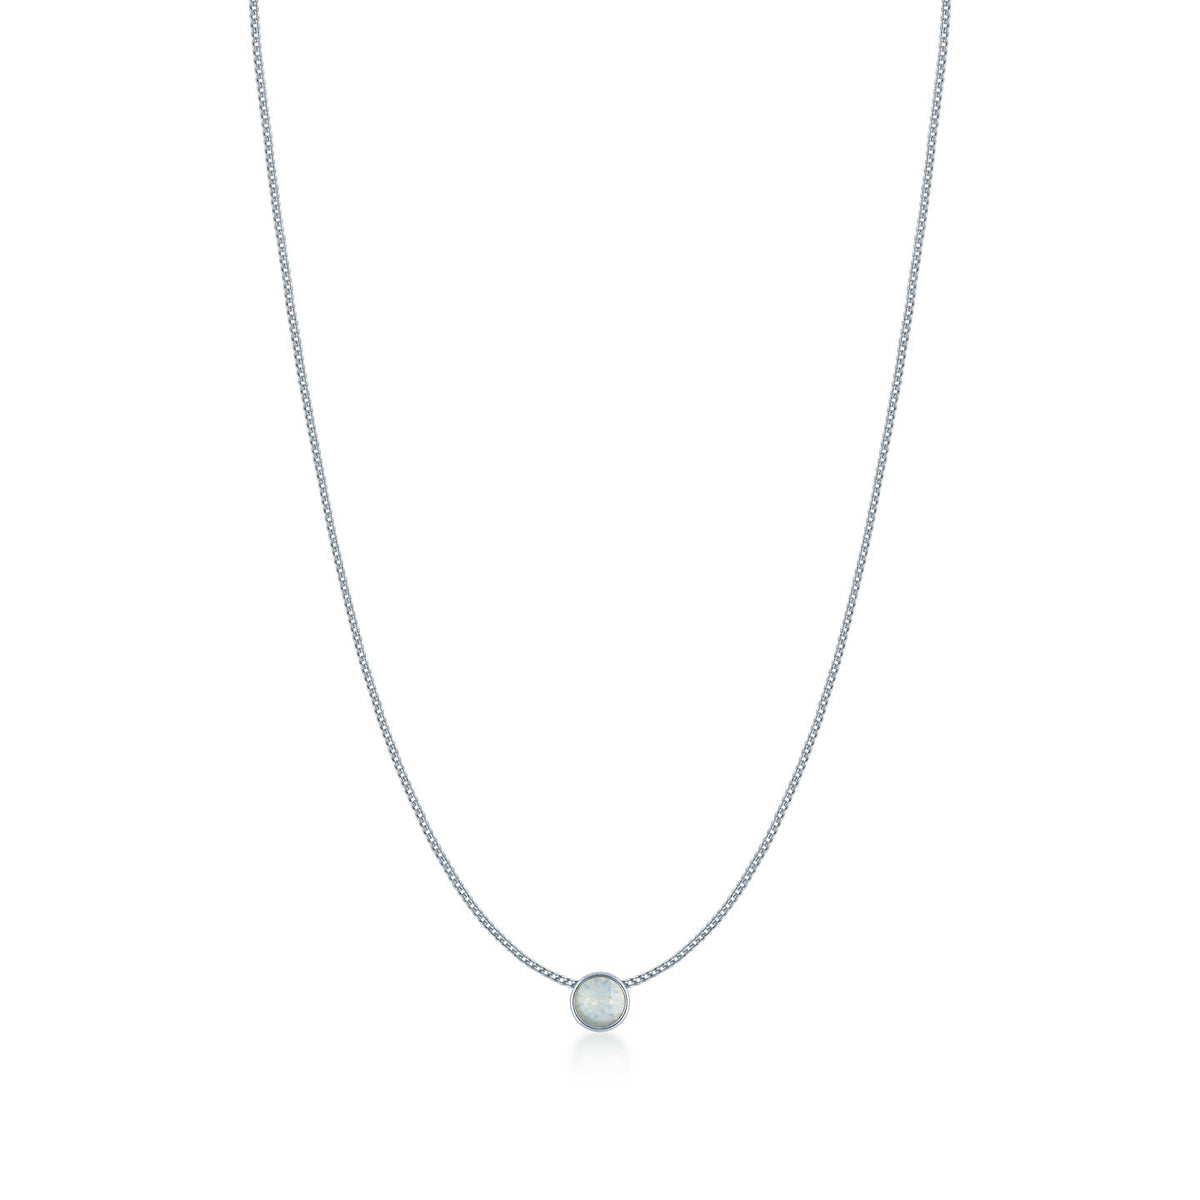 Harley Small Pendant Necklace with Ivory White Round Opals from Swarovski Silver Toned Rhodium Plated - Ed Heart